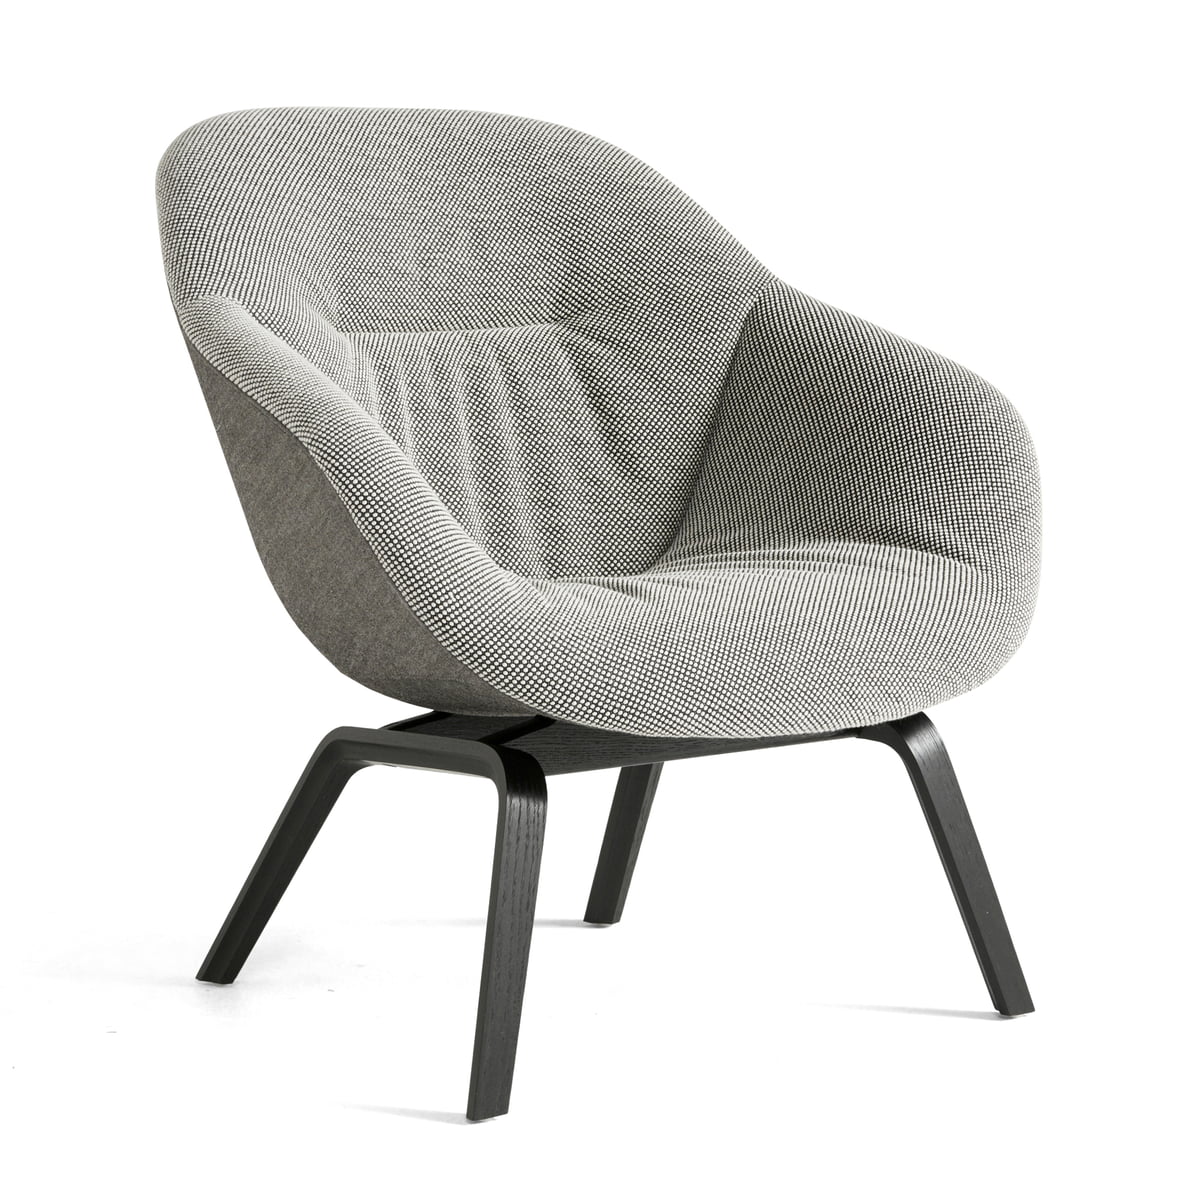 Hay - About a lounge chair aal 83 duo